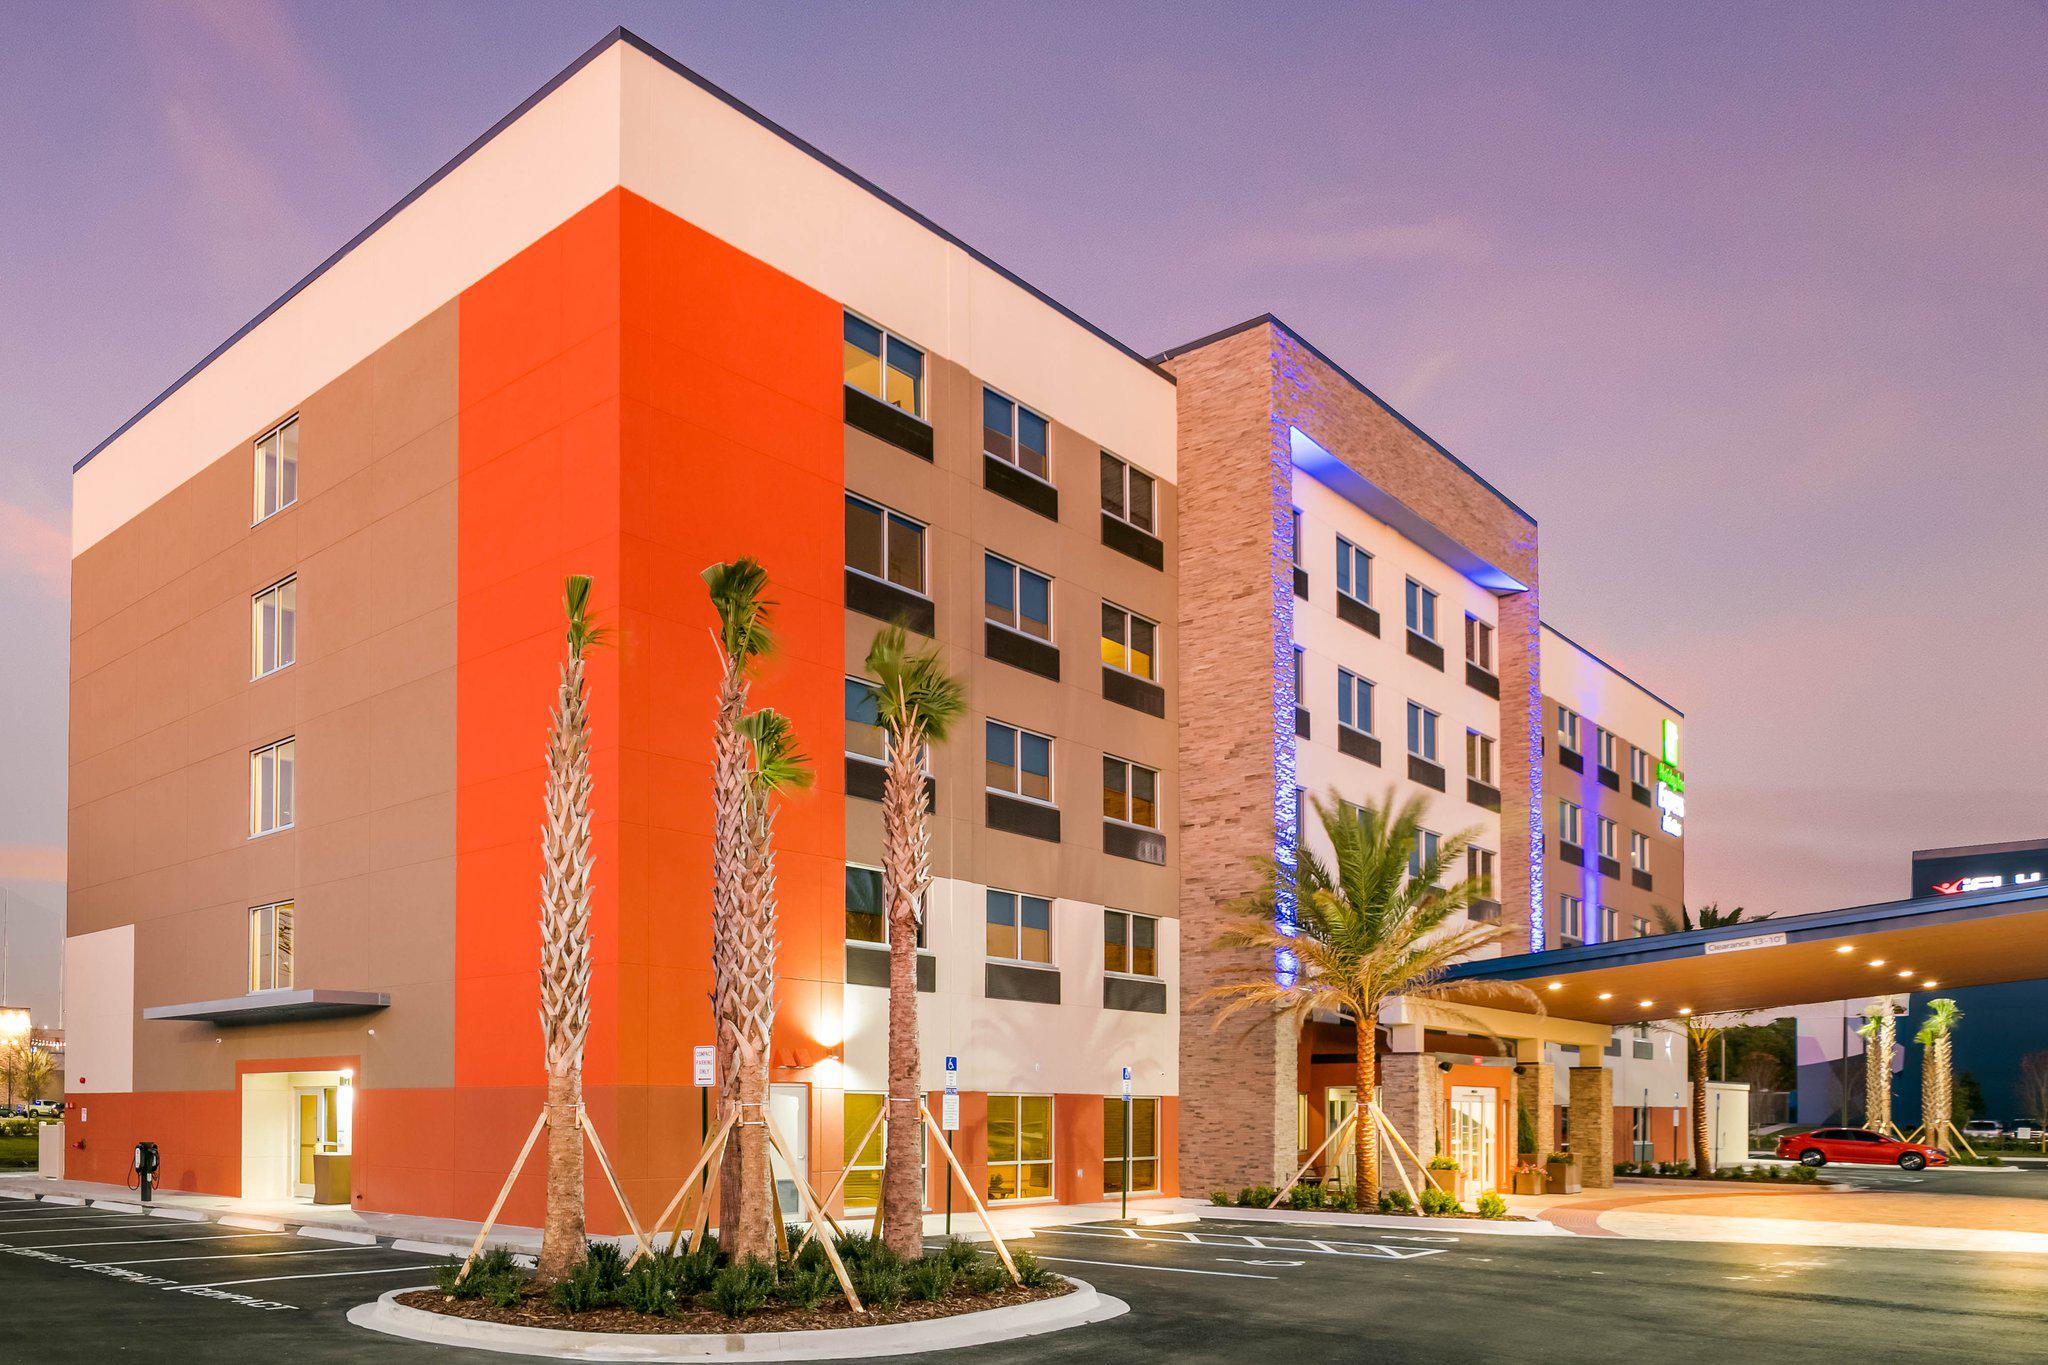 Holiday Inn Express & Suites Jacksonville - Town Center Photo